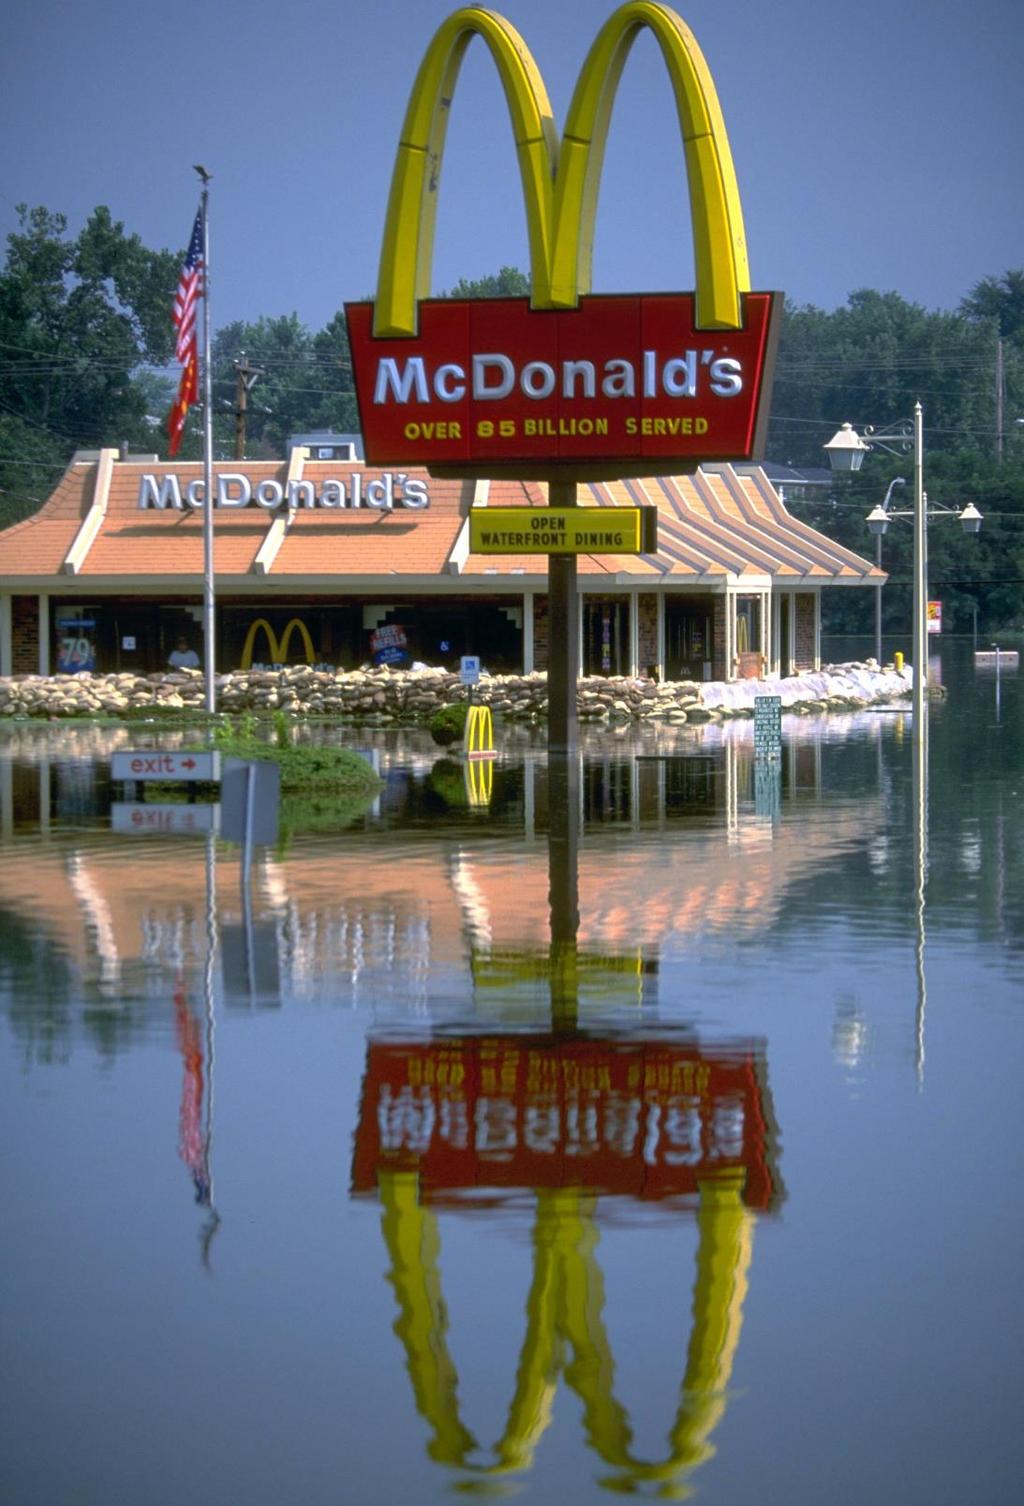 GREAT MISSISSIPPI FLOOD of 1993 Although the direct cause was heavy rainfall, many blamed human activity such as unwise development of flood-plain areas for